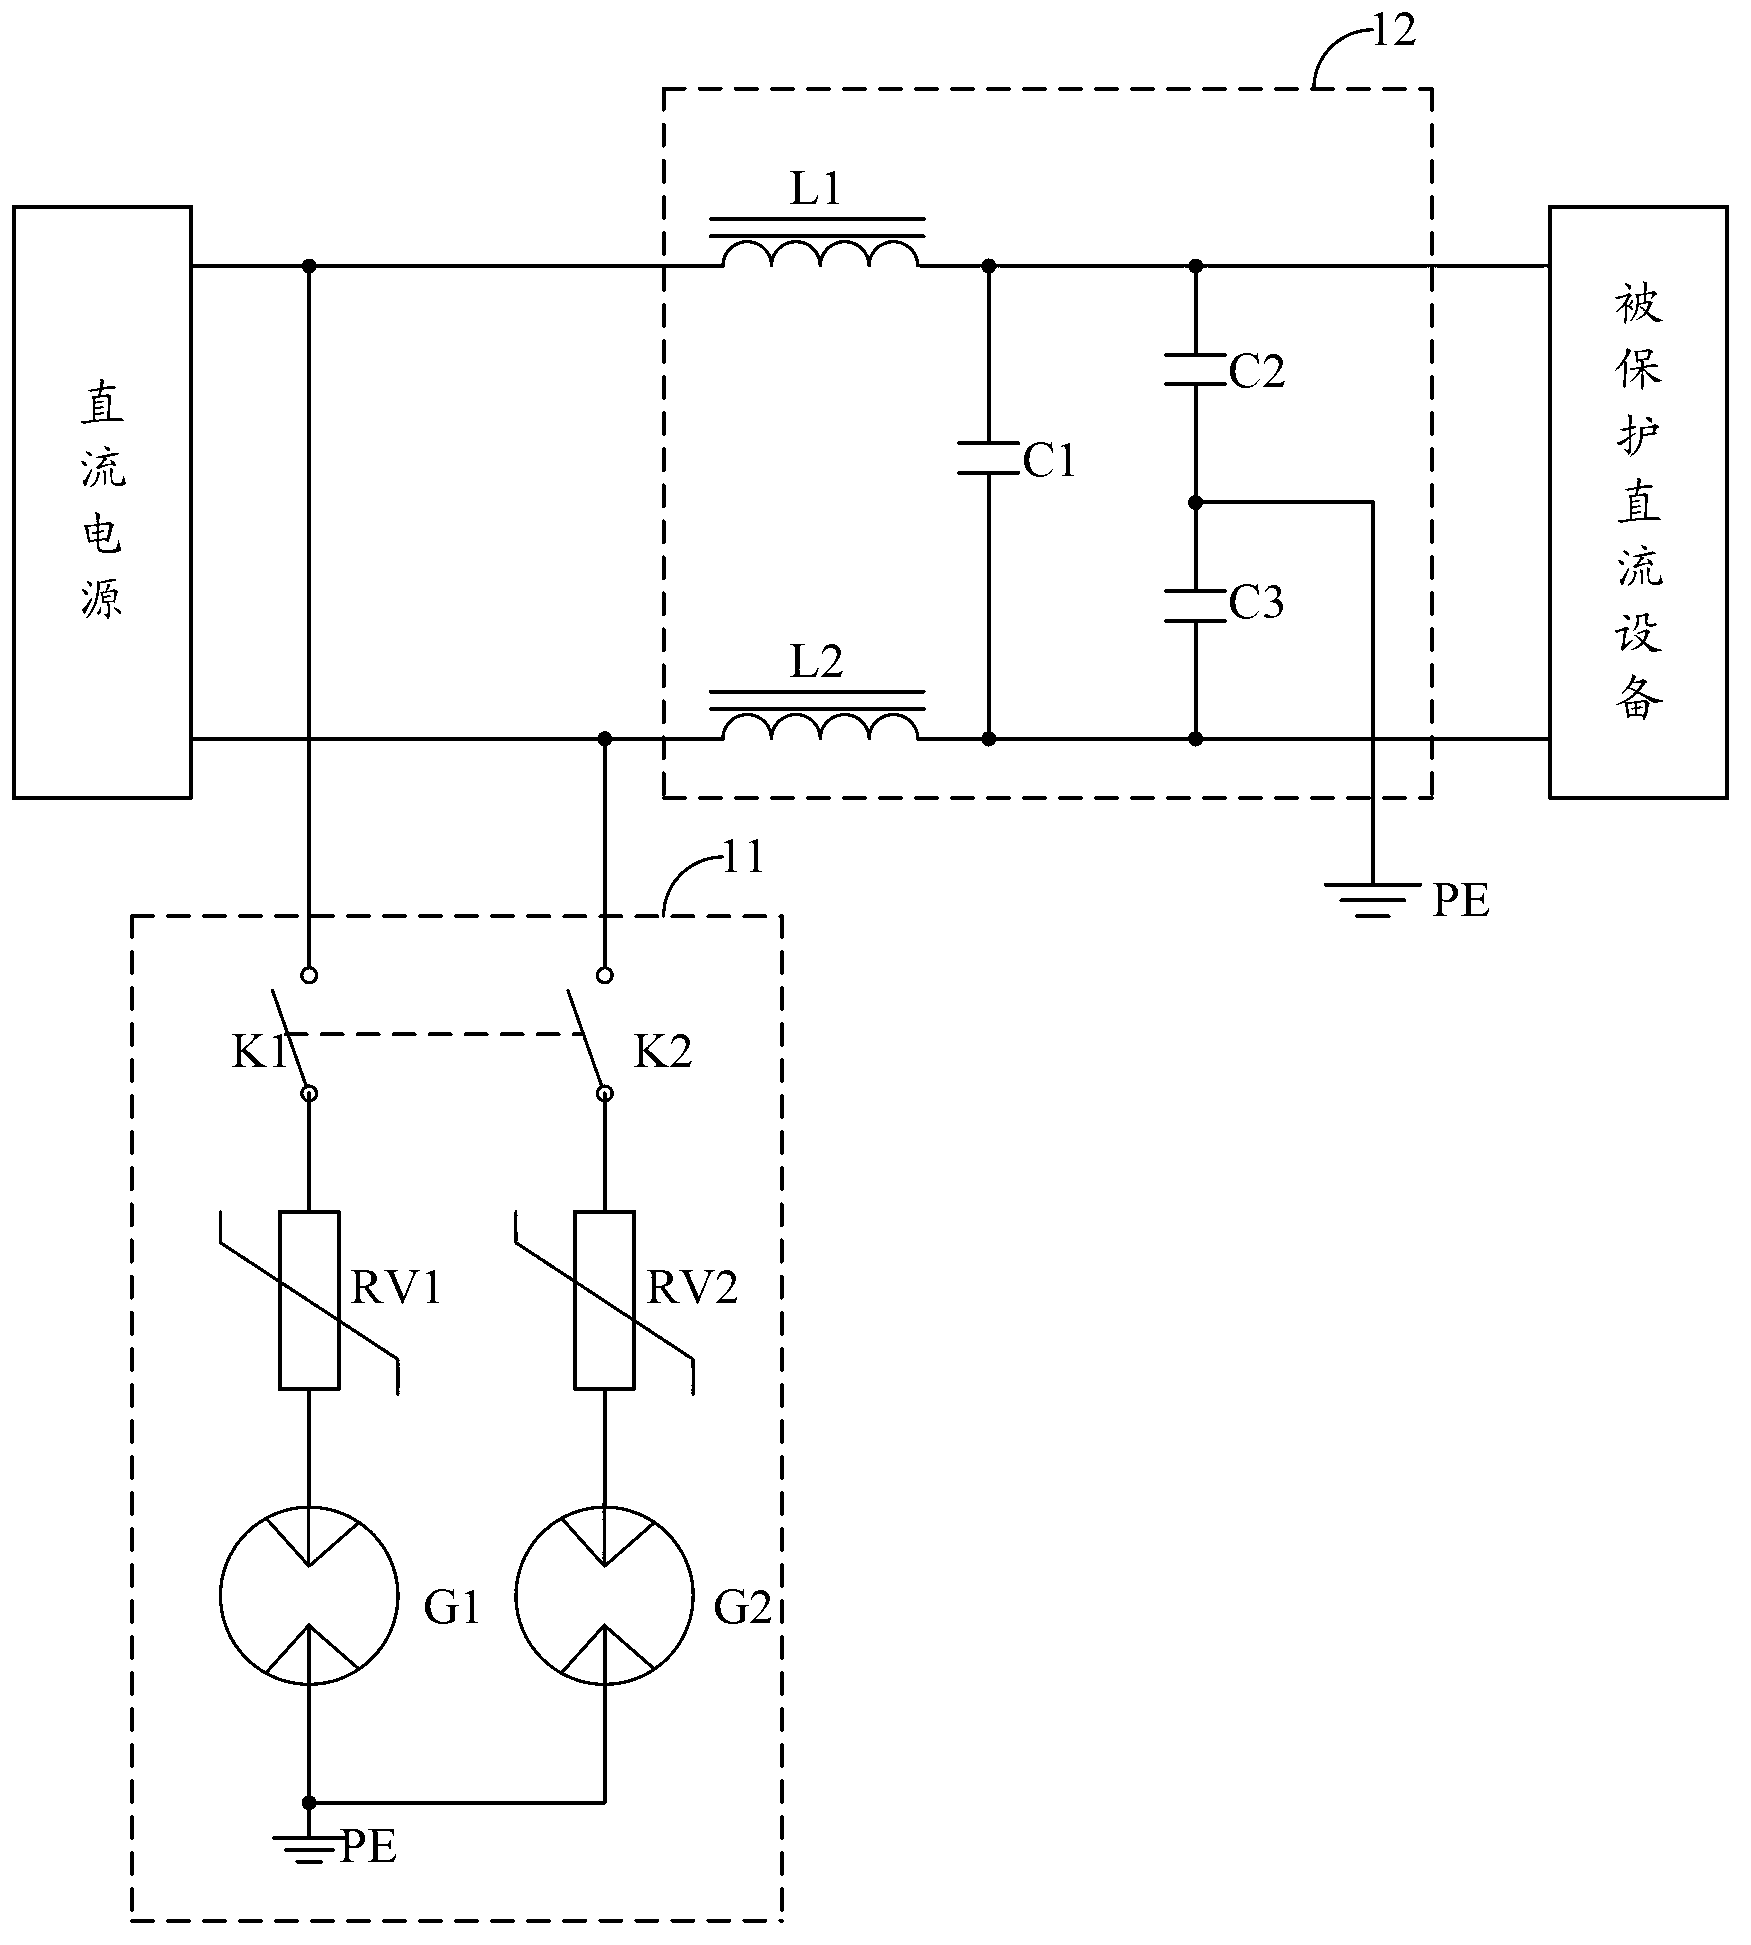 Lightning protection circuit of direct-current system